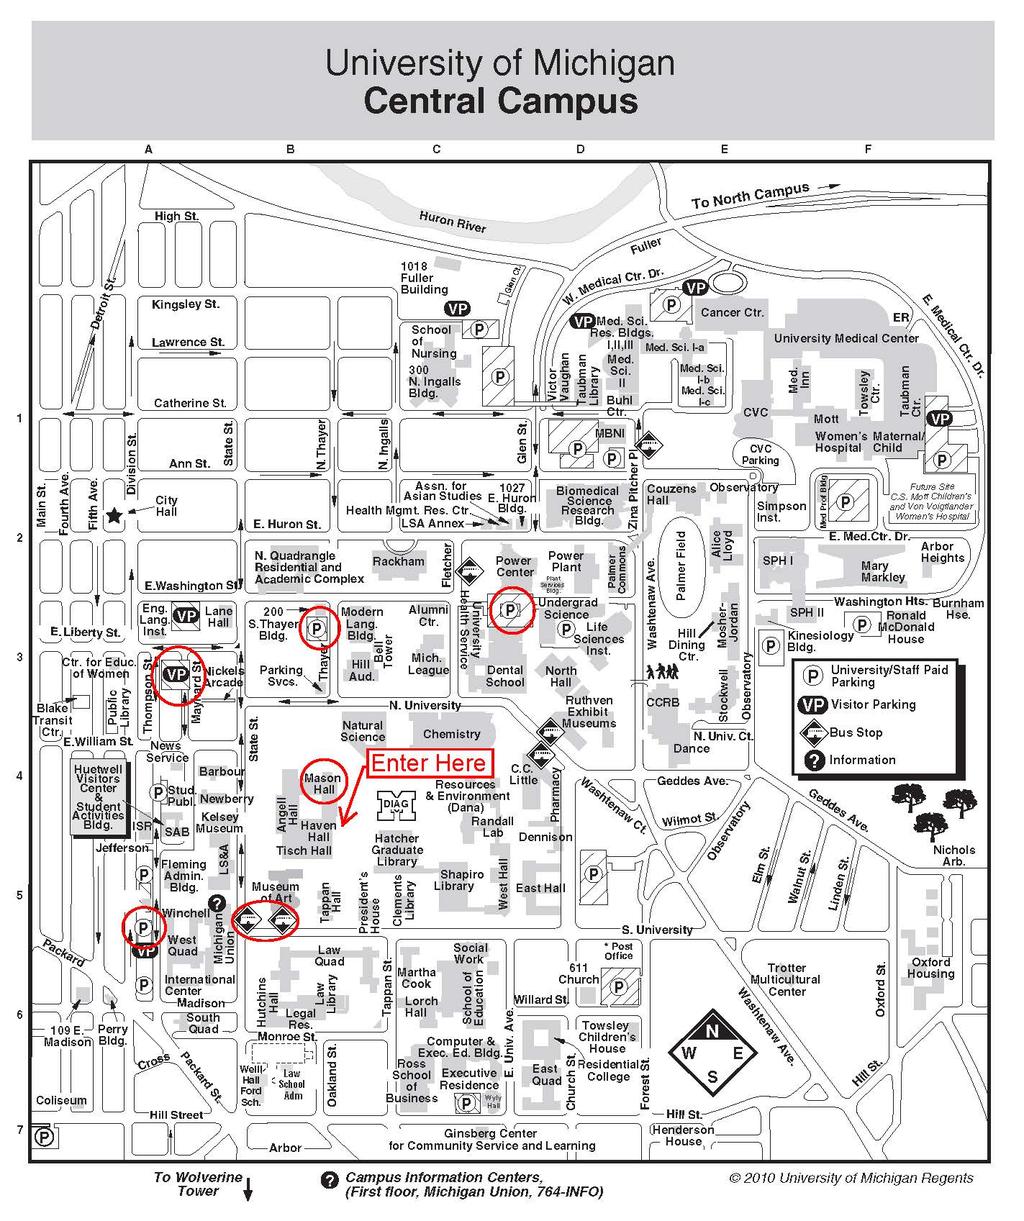 Please see the U-M Campus Information website at https://campusinfo.umich.edu/ for: Campus map (use Find Your Way > Maps & Wayfinding) Parking (https://campusinfo.umich.edu/article/parking-0) Driving directions (https://campusinfo.